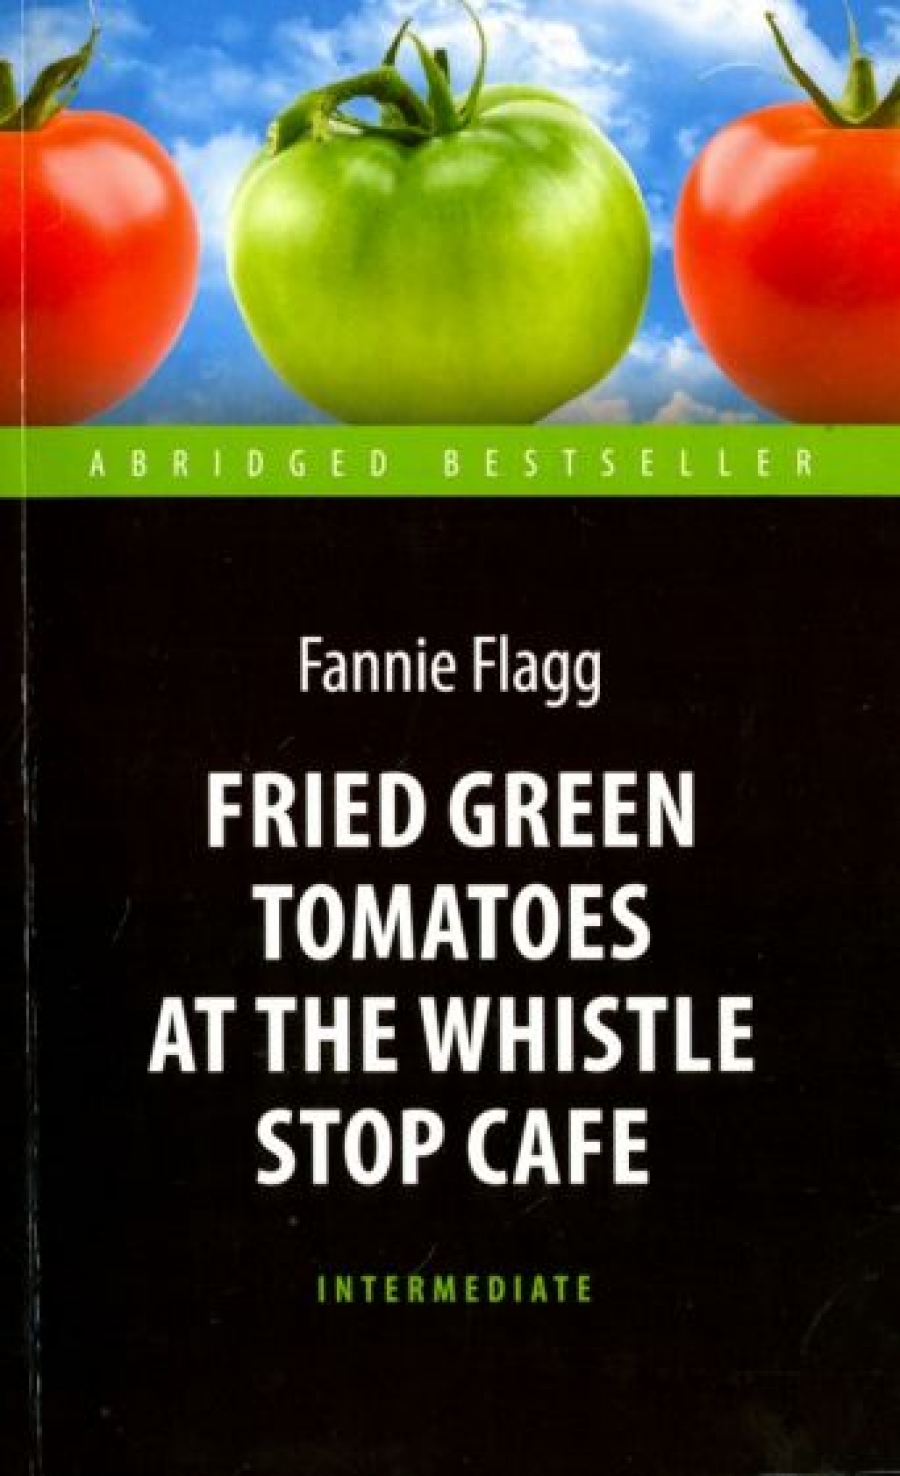  . Fried Green Tomatoes at the Whistle Stop Cafe  